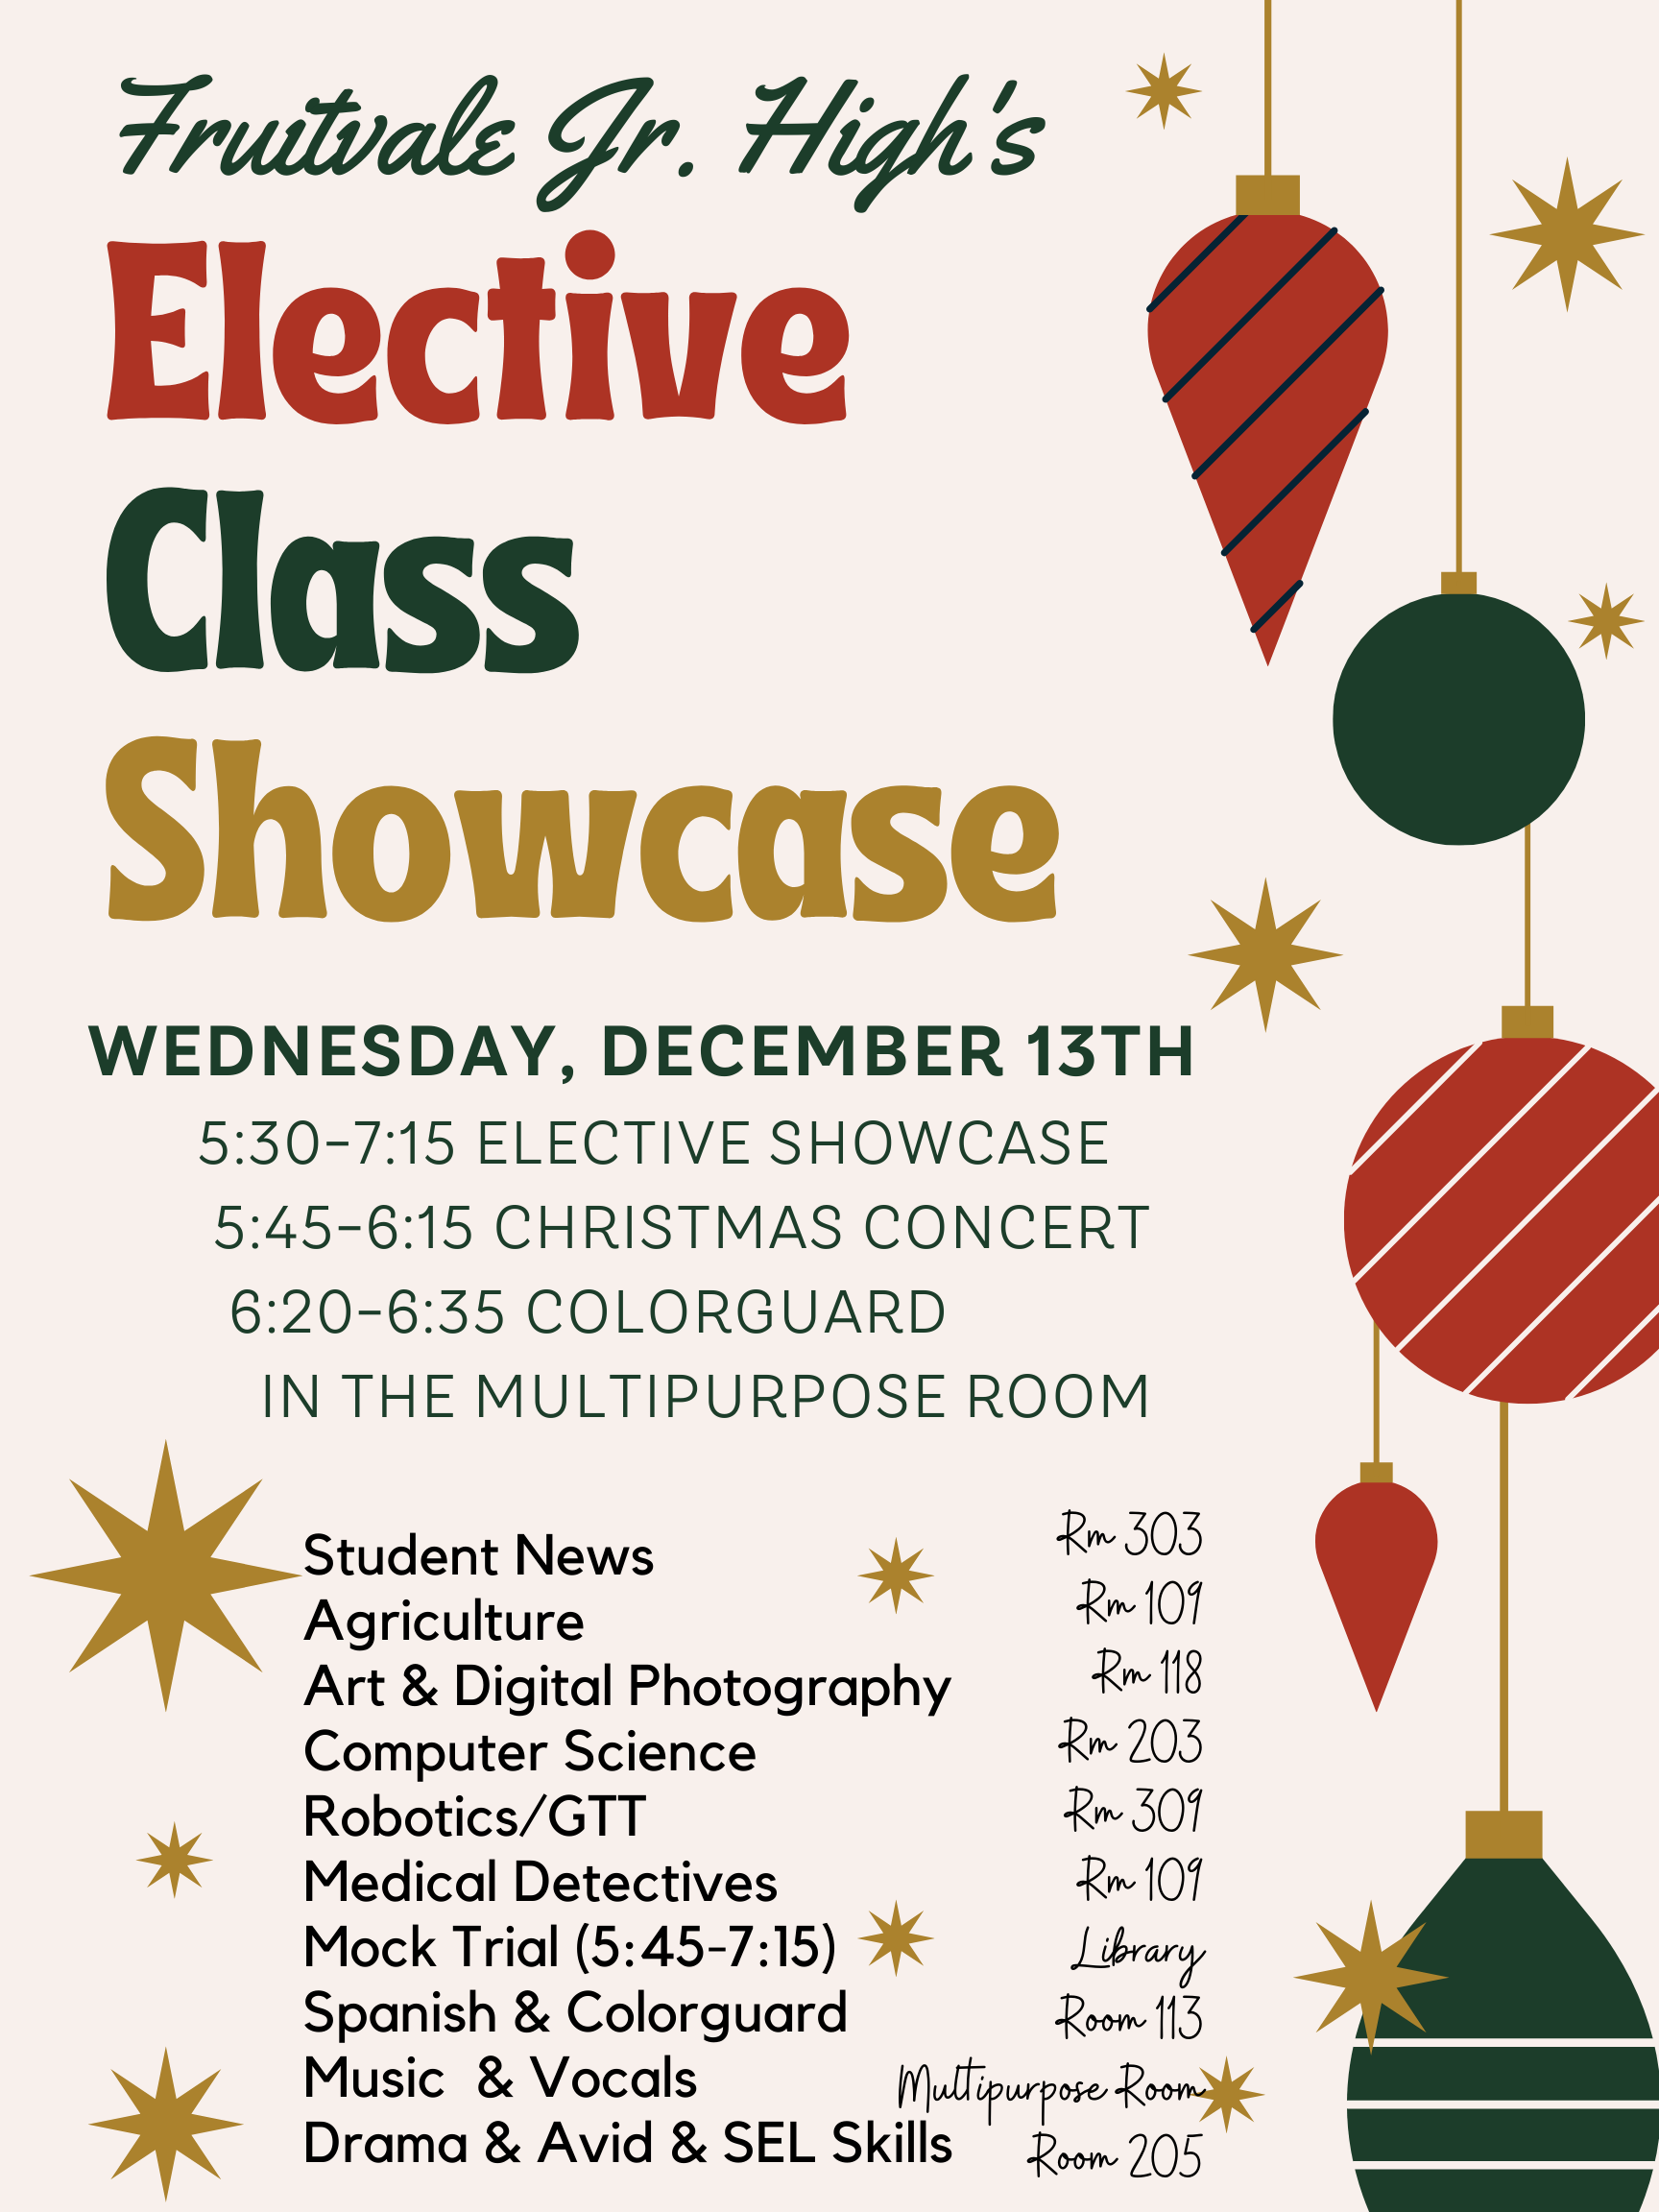 Image that states: Fruitvale Jr. High's Elective Class Showcase. Wednesday, December 13th , 5:30-7:15 Elective Showcase, 5:45-6:15 Christmas Concert, 6:20-6:35 Colorguard, IN THE Multipurpose Room. Student News will be in room 303; Agriculture will be in Room 109, Art and Digital Photography will be in Rm 118, Computer Science will be in room 203, Robostics/GTT will be in room 309, Medical Detectives will be in room 109, Mock Trial will be in the library, spanish and colorguard will be in room 113, Music and Vocals will be in the MPR,Drama and Avid will be in Room 205